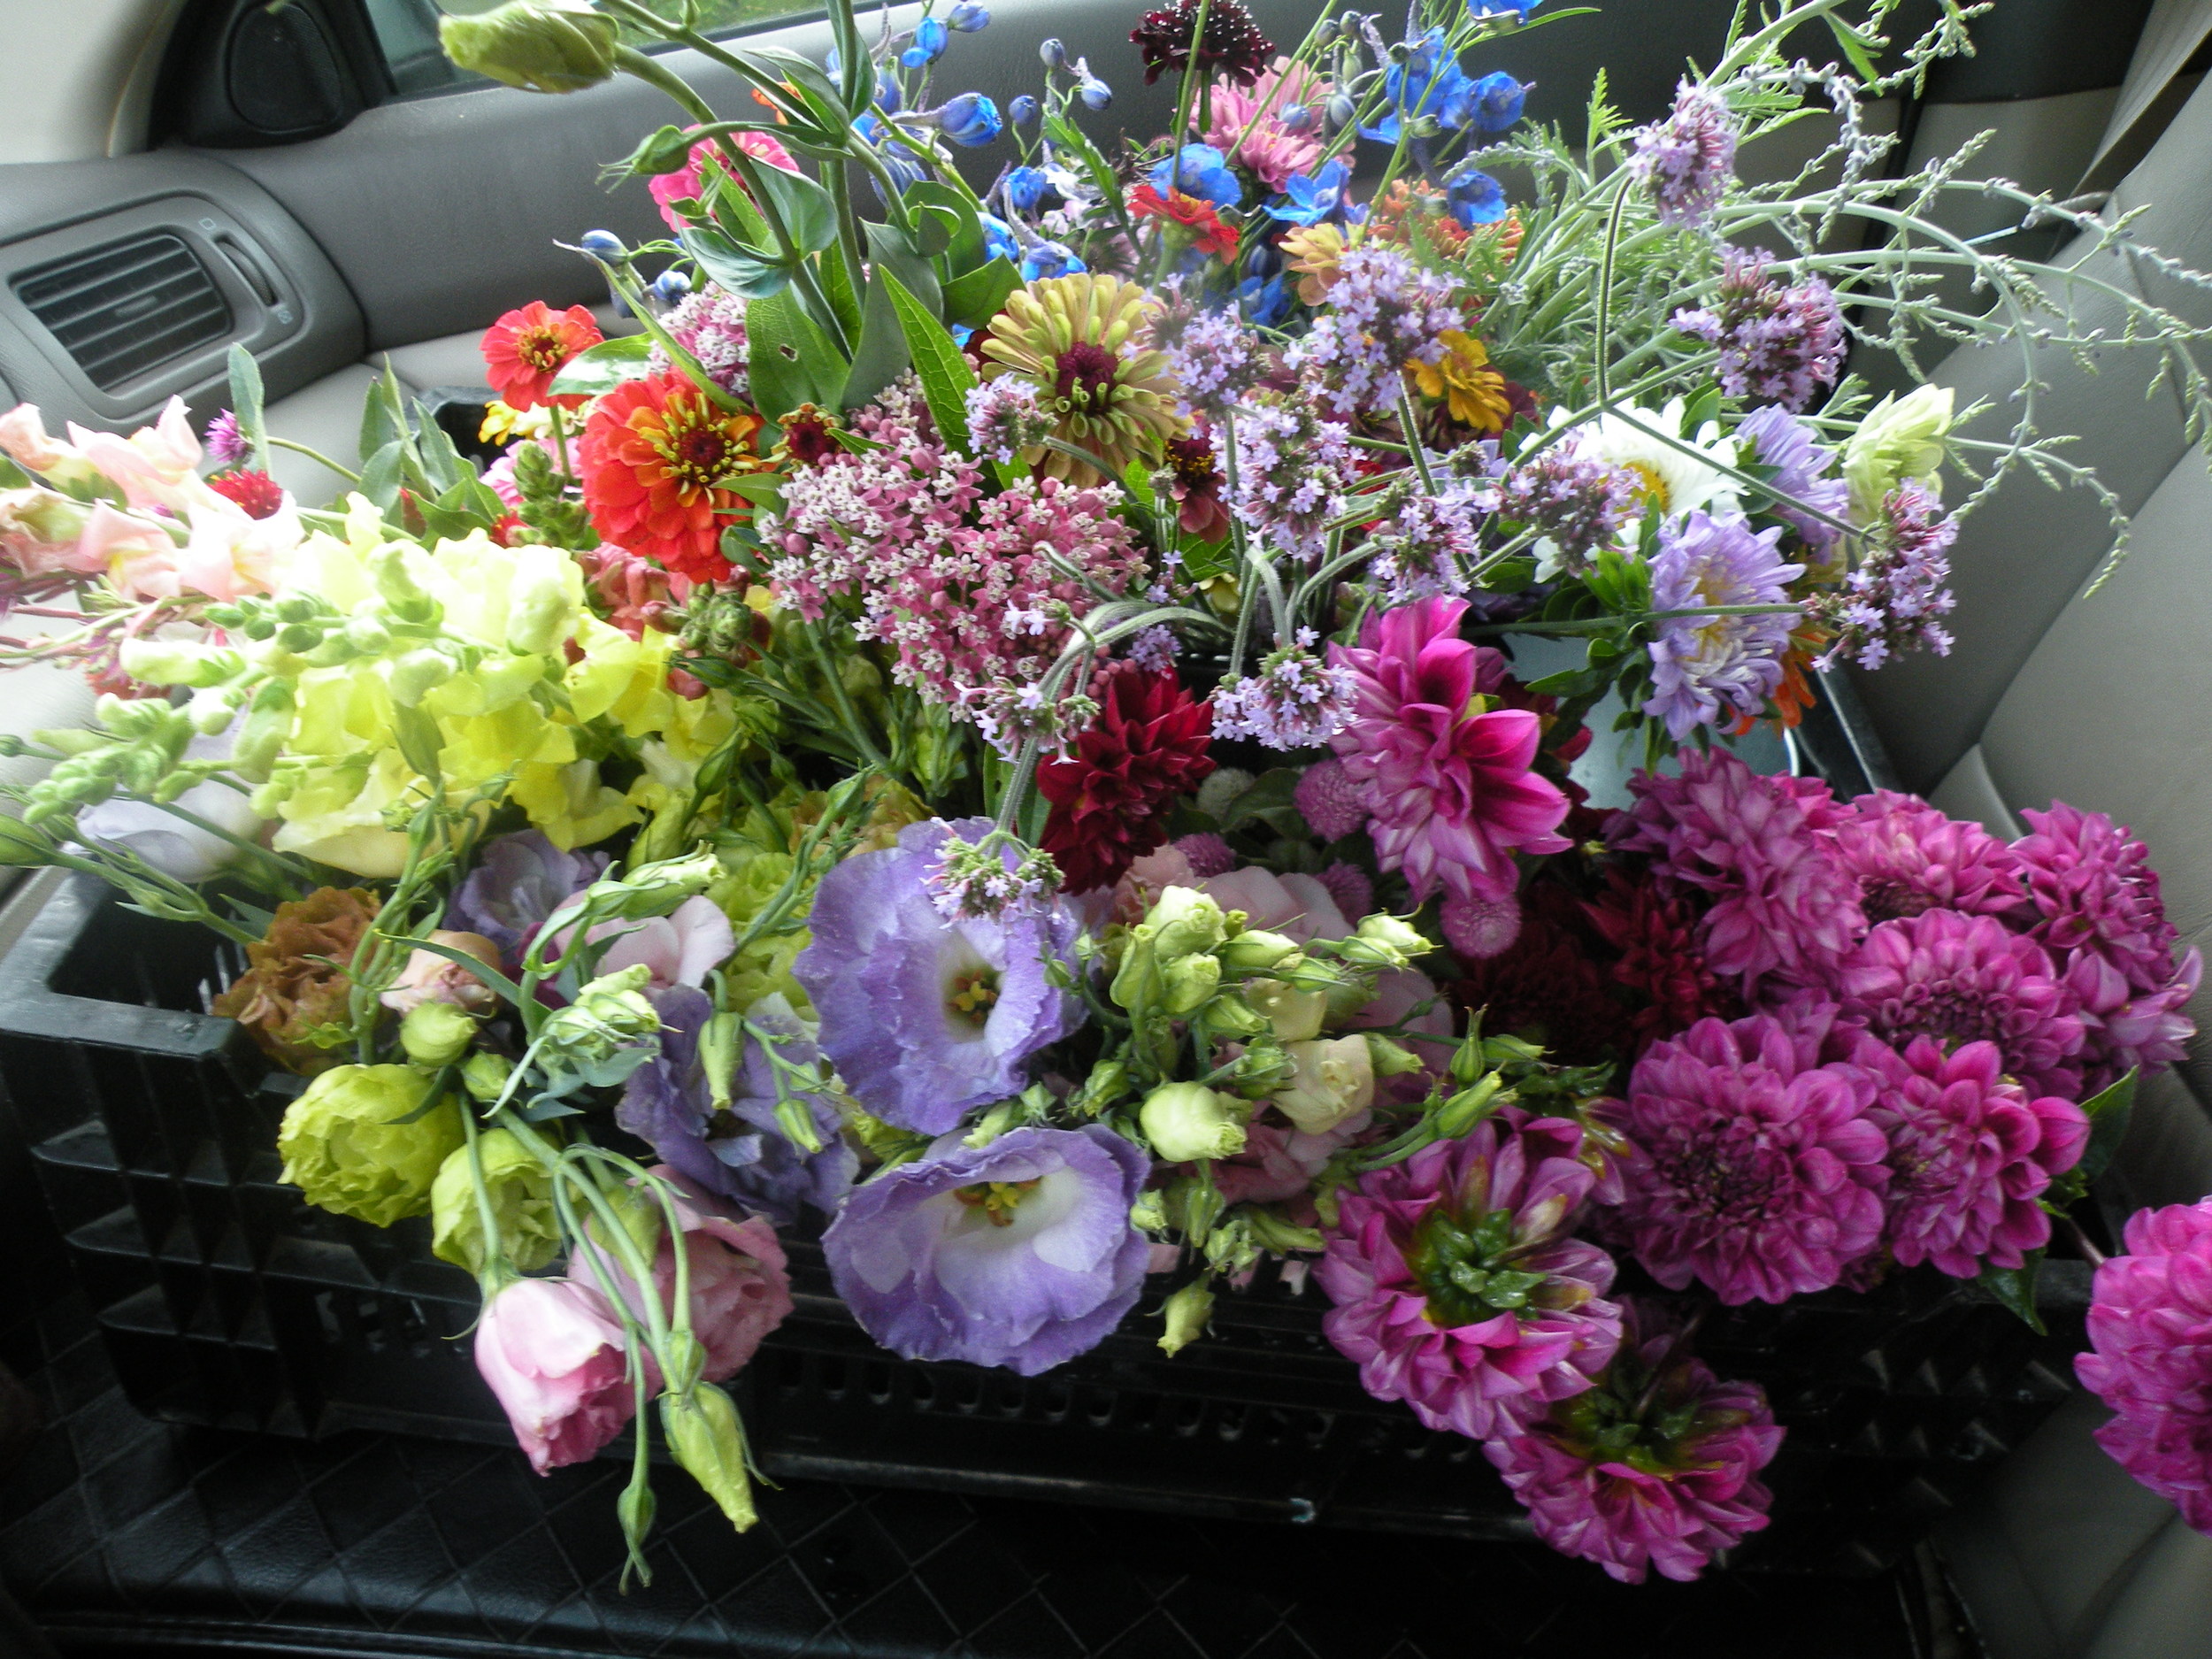 Flowers in the driver seat en route to bouquet making for July 23 wedding celebration